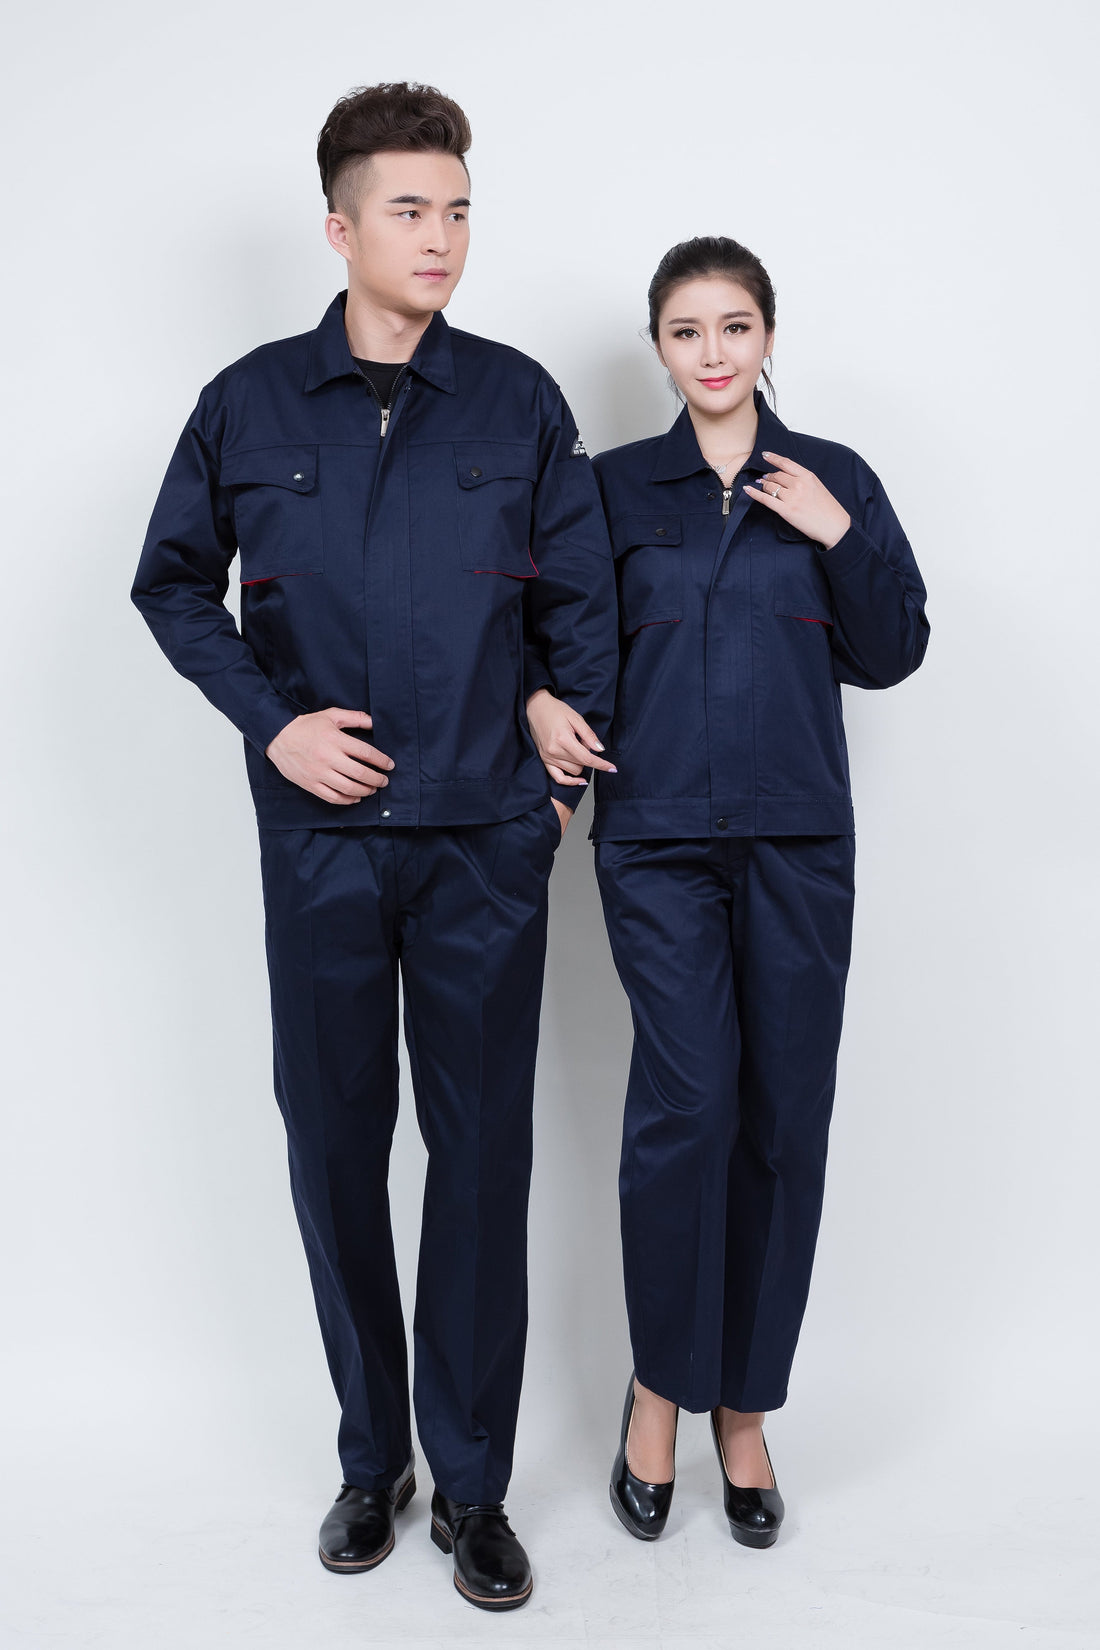 Corals Trading Co. 可樂思百貨商行 纯棉 Spring and Autumn style long-sleeved anti-static work clothes series SD-AS-W701